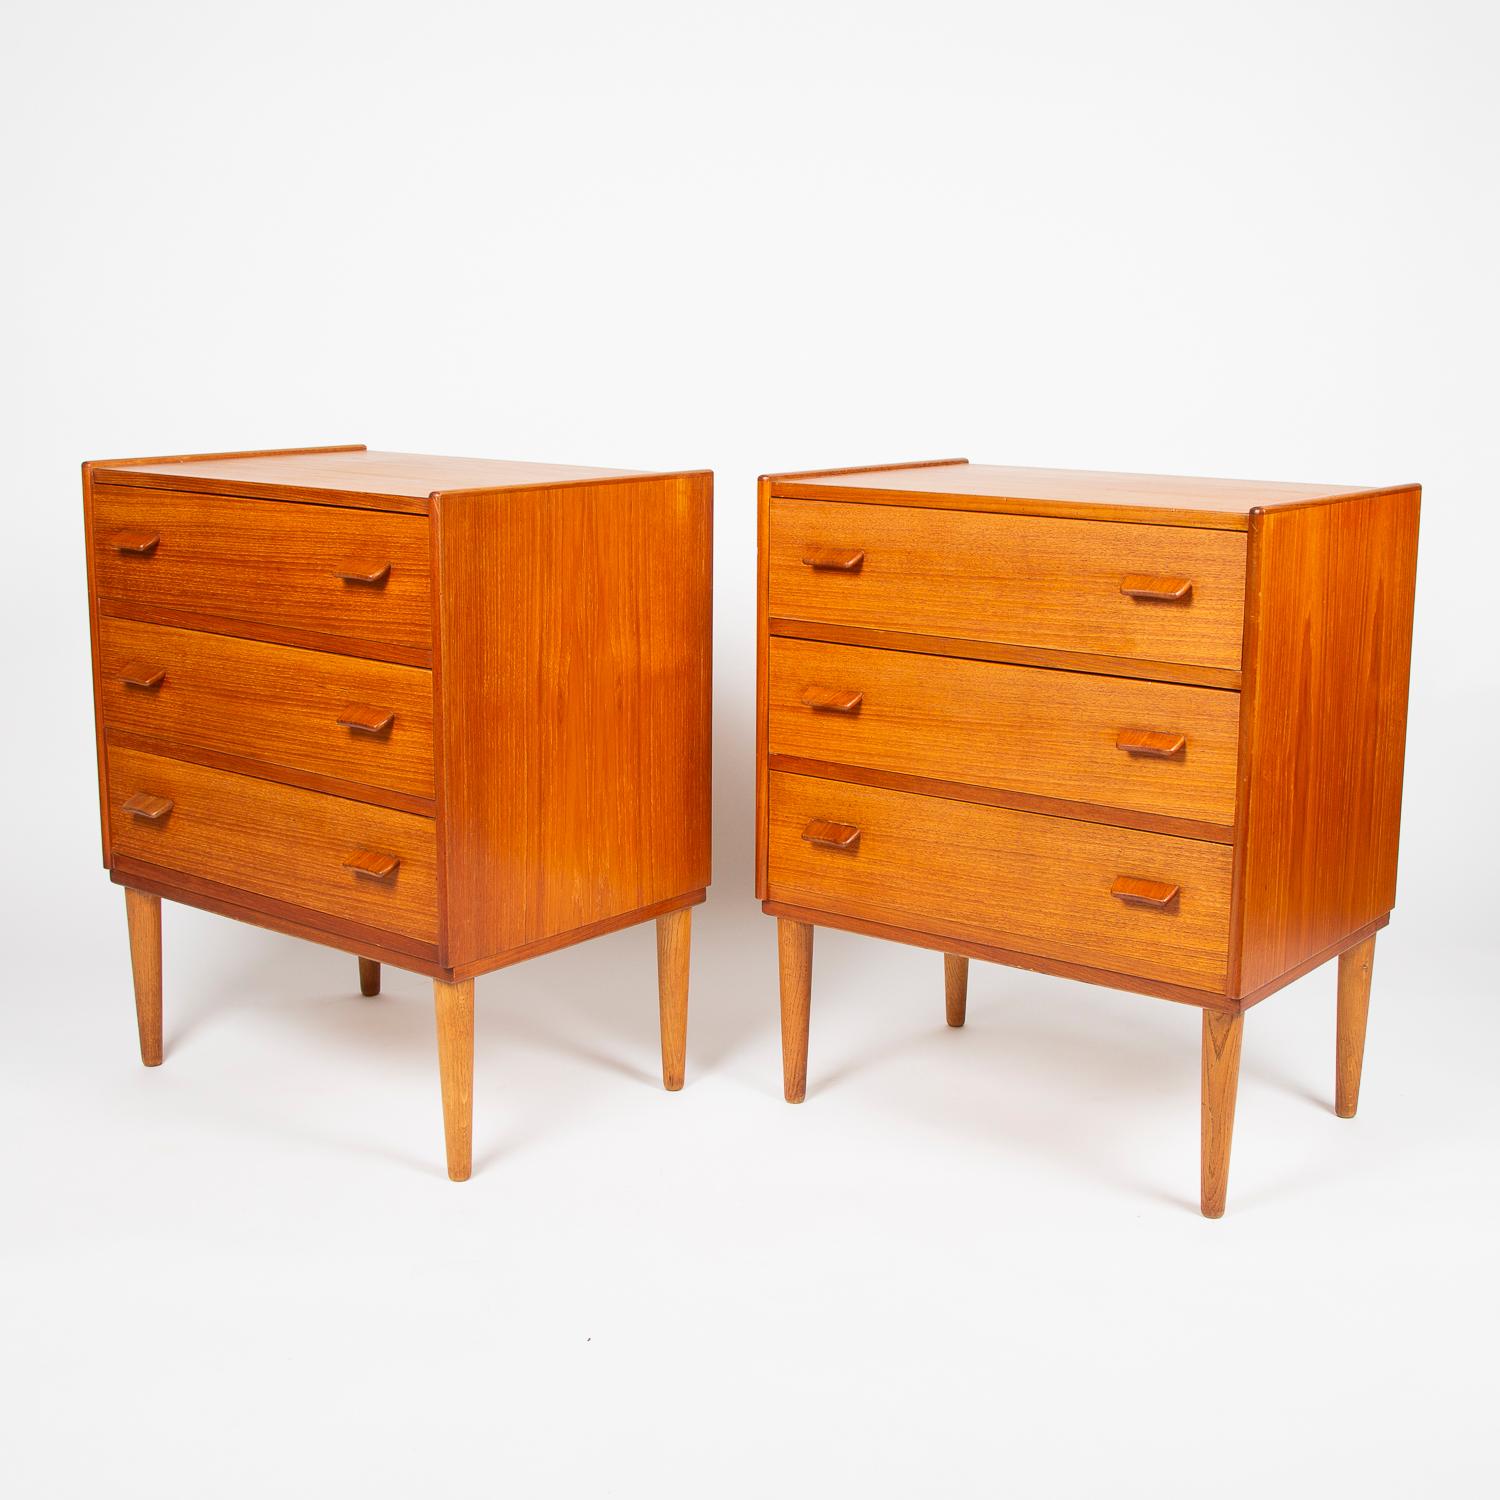 A pair of 1960s teak chest of drawers design by Poul Volther for Munch Møbler of Slagelse, Denmark.

Each with three drawers.

Backs have marker's mark.

